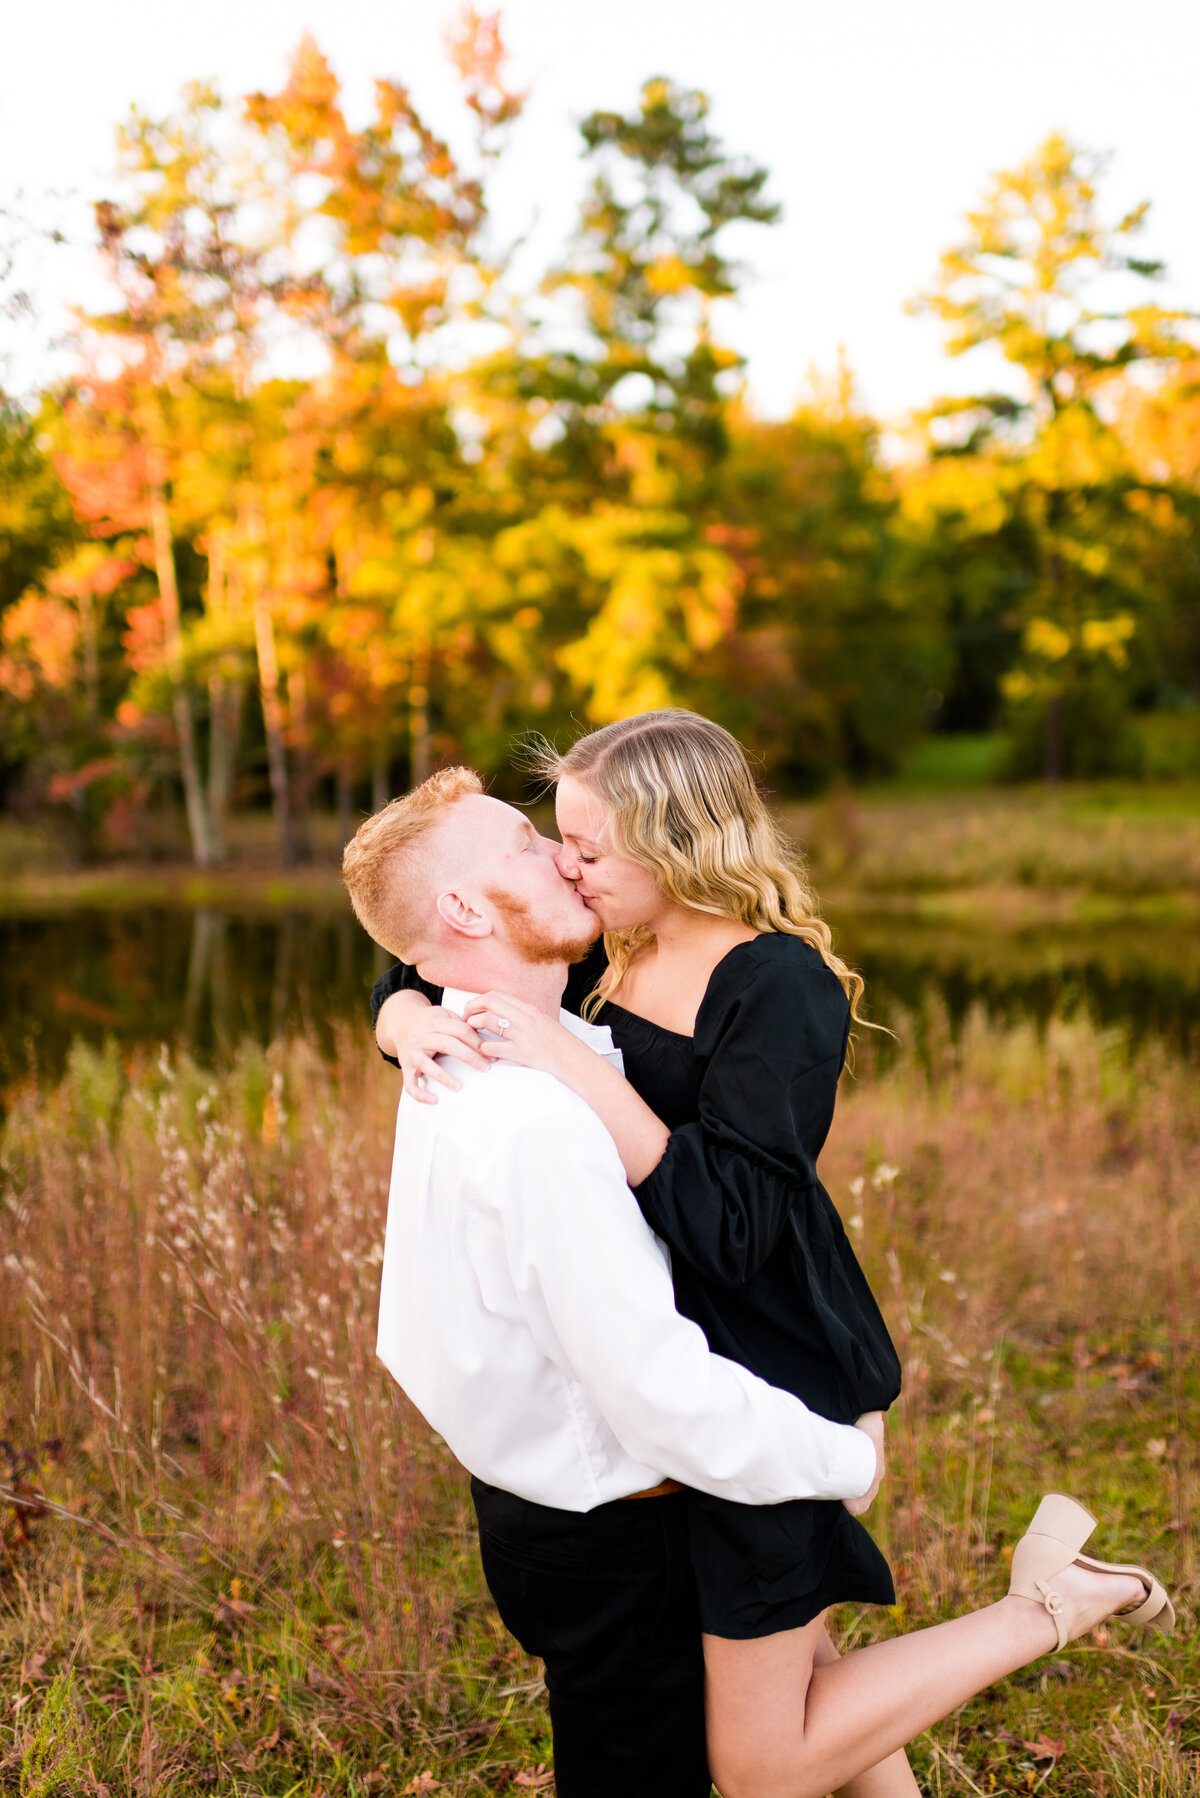 Haley + Andrew Engagements - Photography by Gerri Anna-134